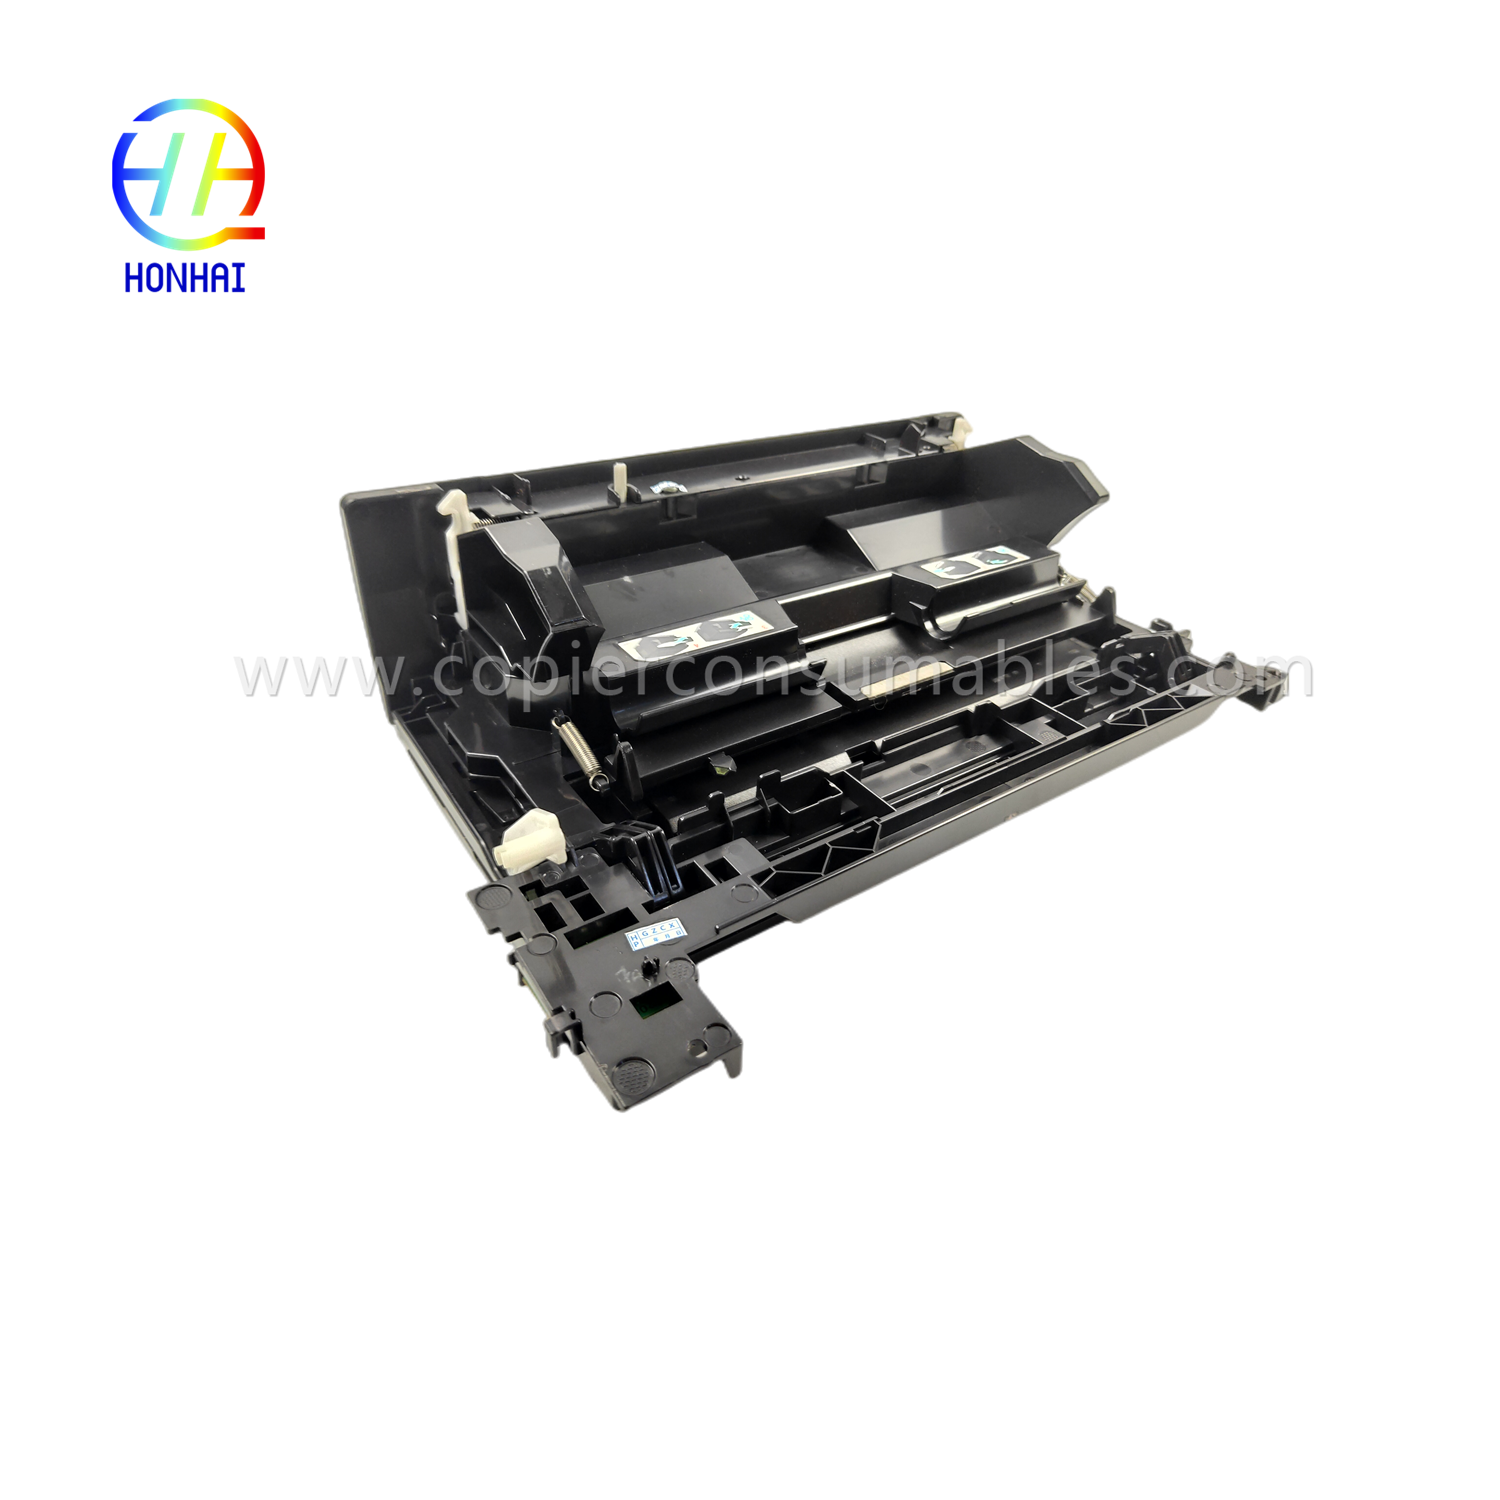 https://www.copierconsumables.com/front-door-for-hp-pro400-m401-hp401dne-401d-first-tray-manual-feeder-front-cover-product/